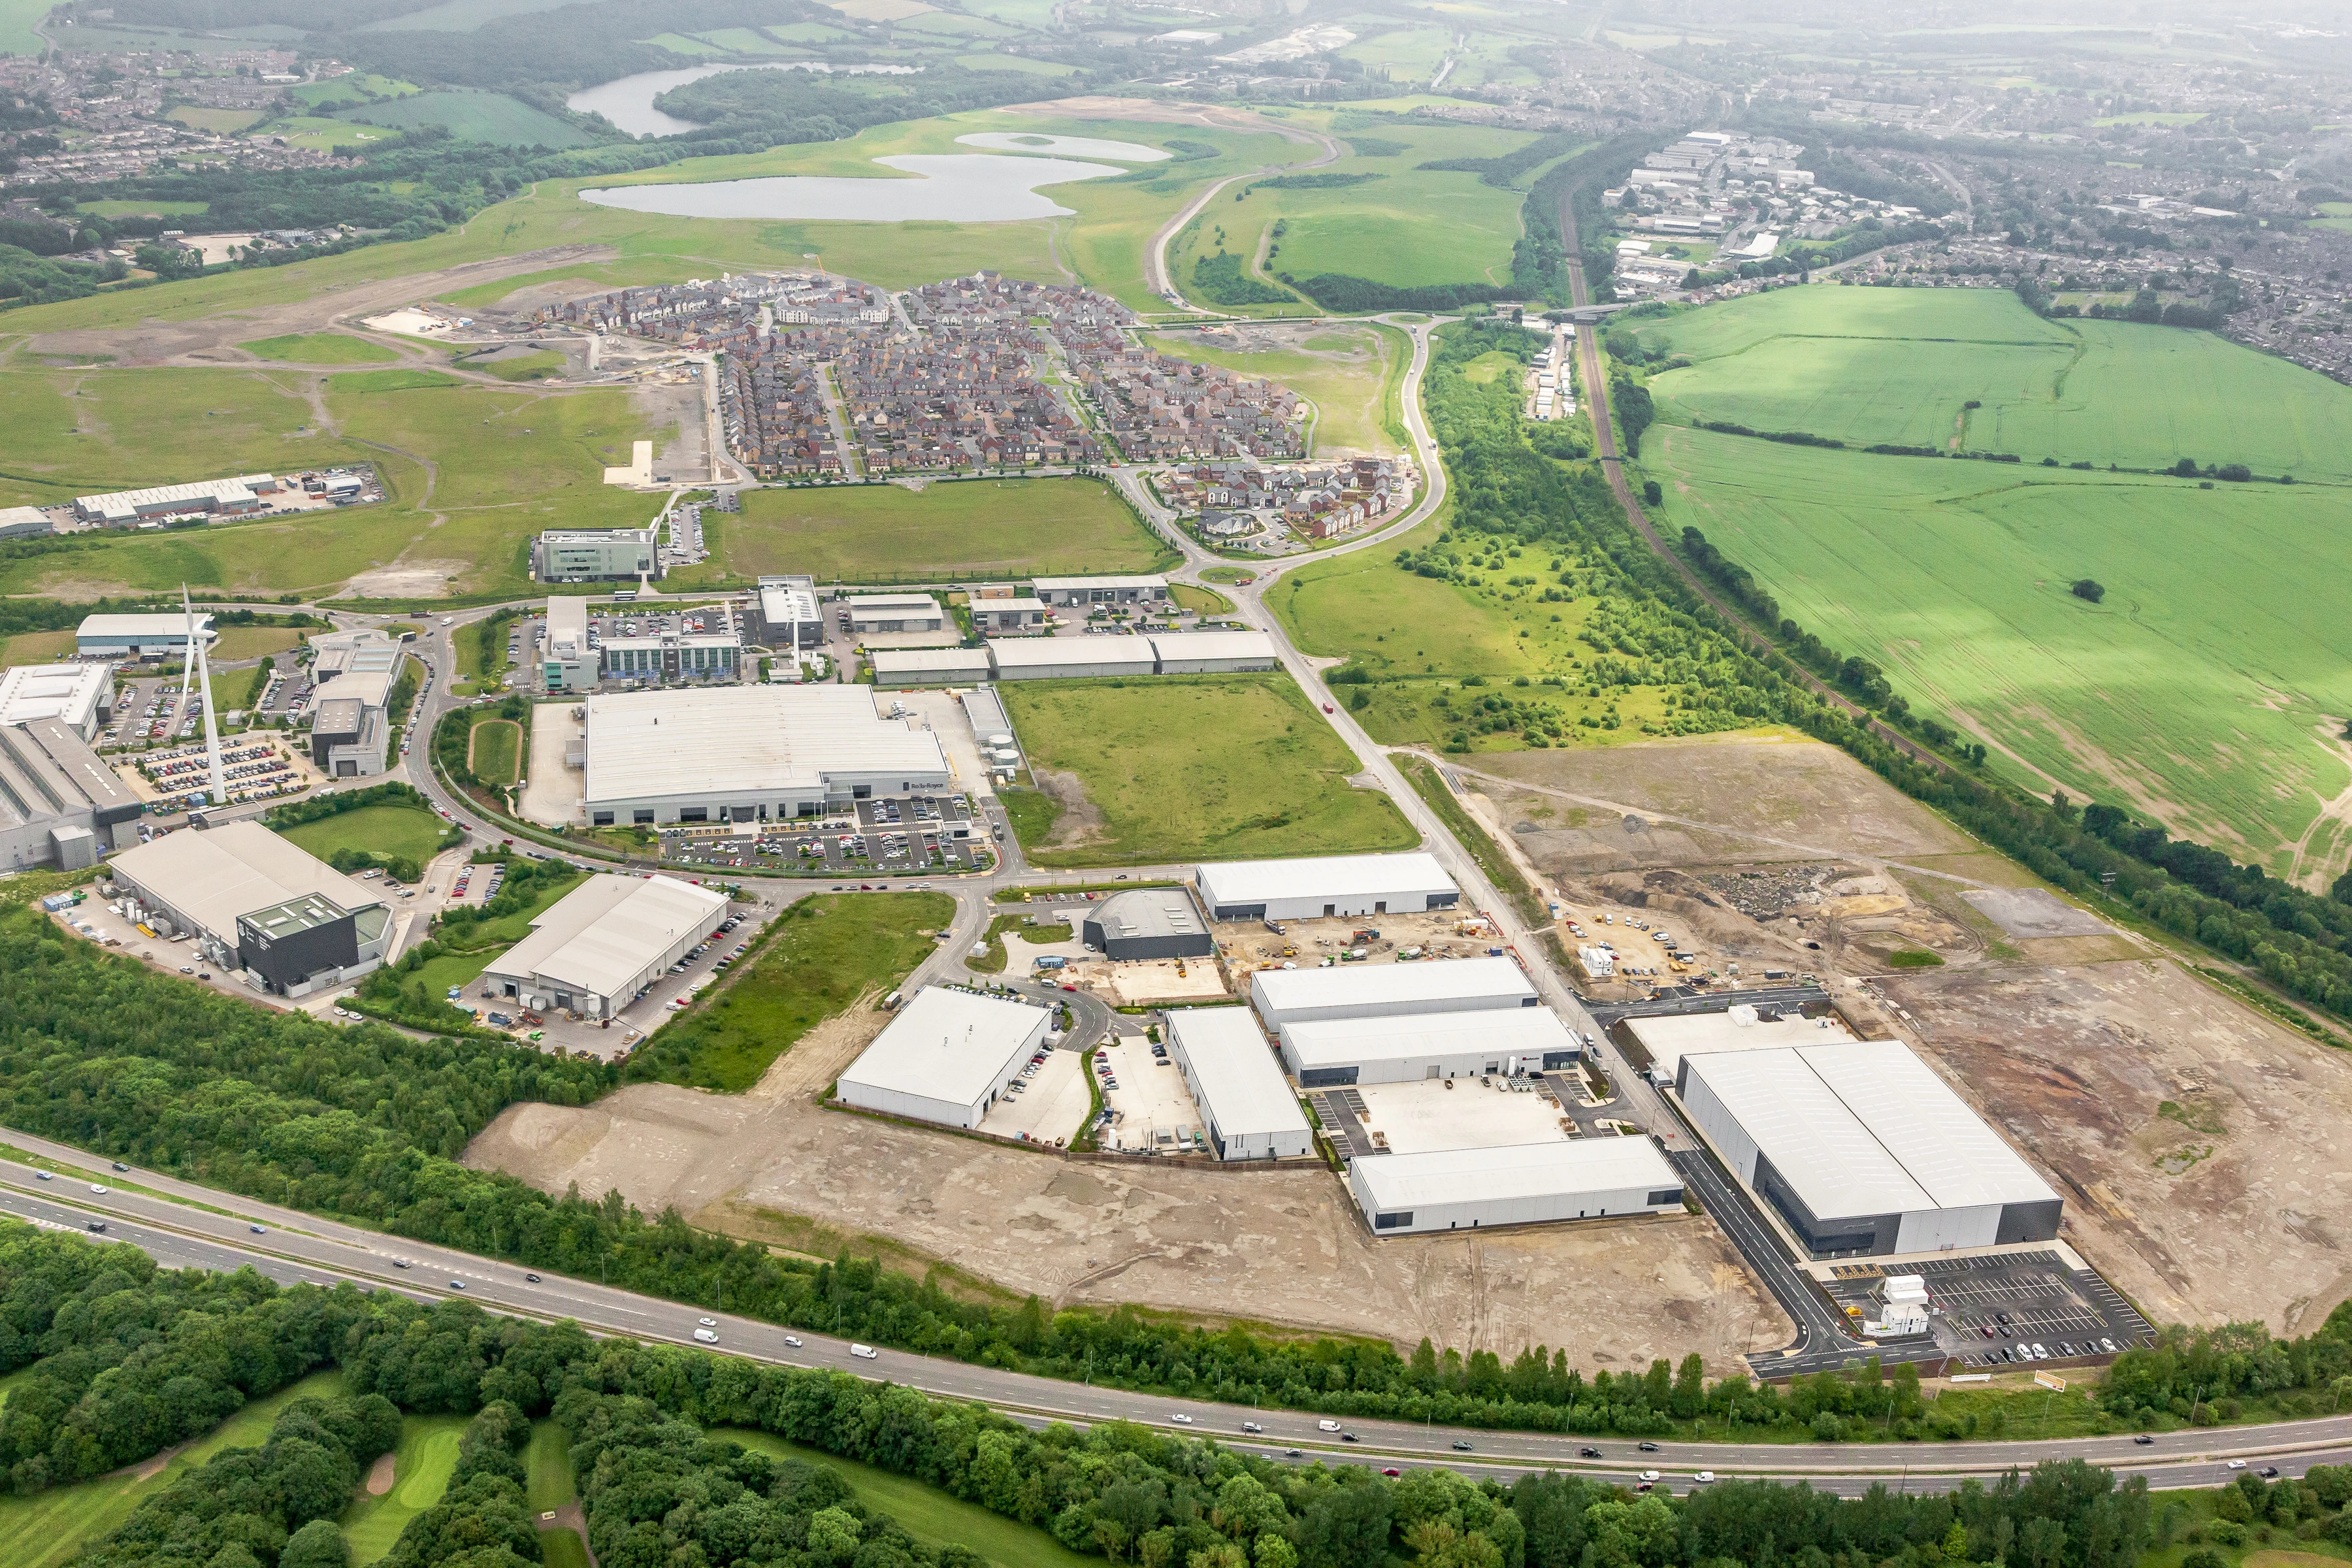 Aerial view of the Waverley Advanced Manufacturing Park